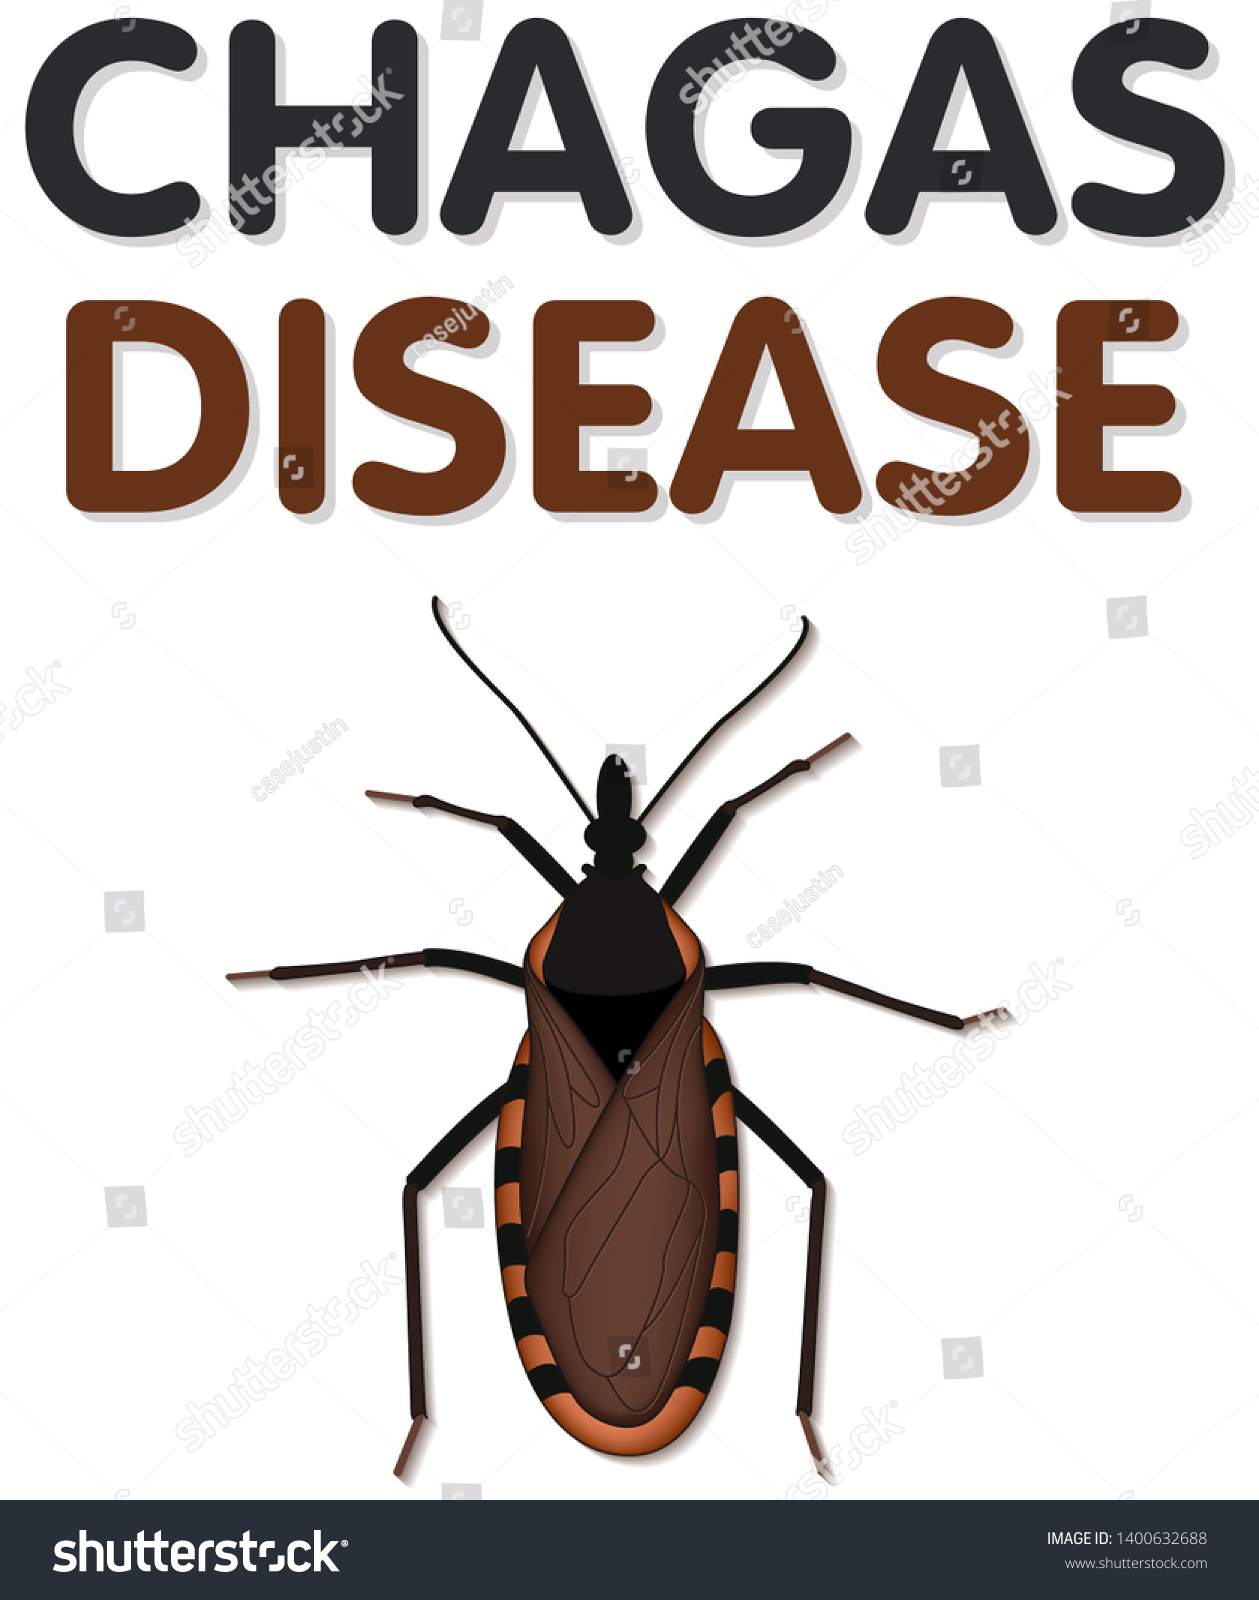 Chagas Disease Caused By Parasite Trypanosoma Stock Vector Royalty Free 1400632688 6483